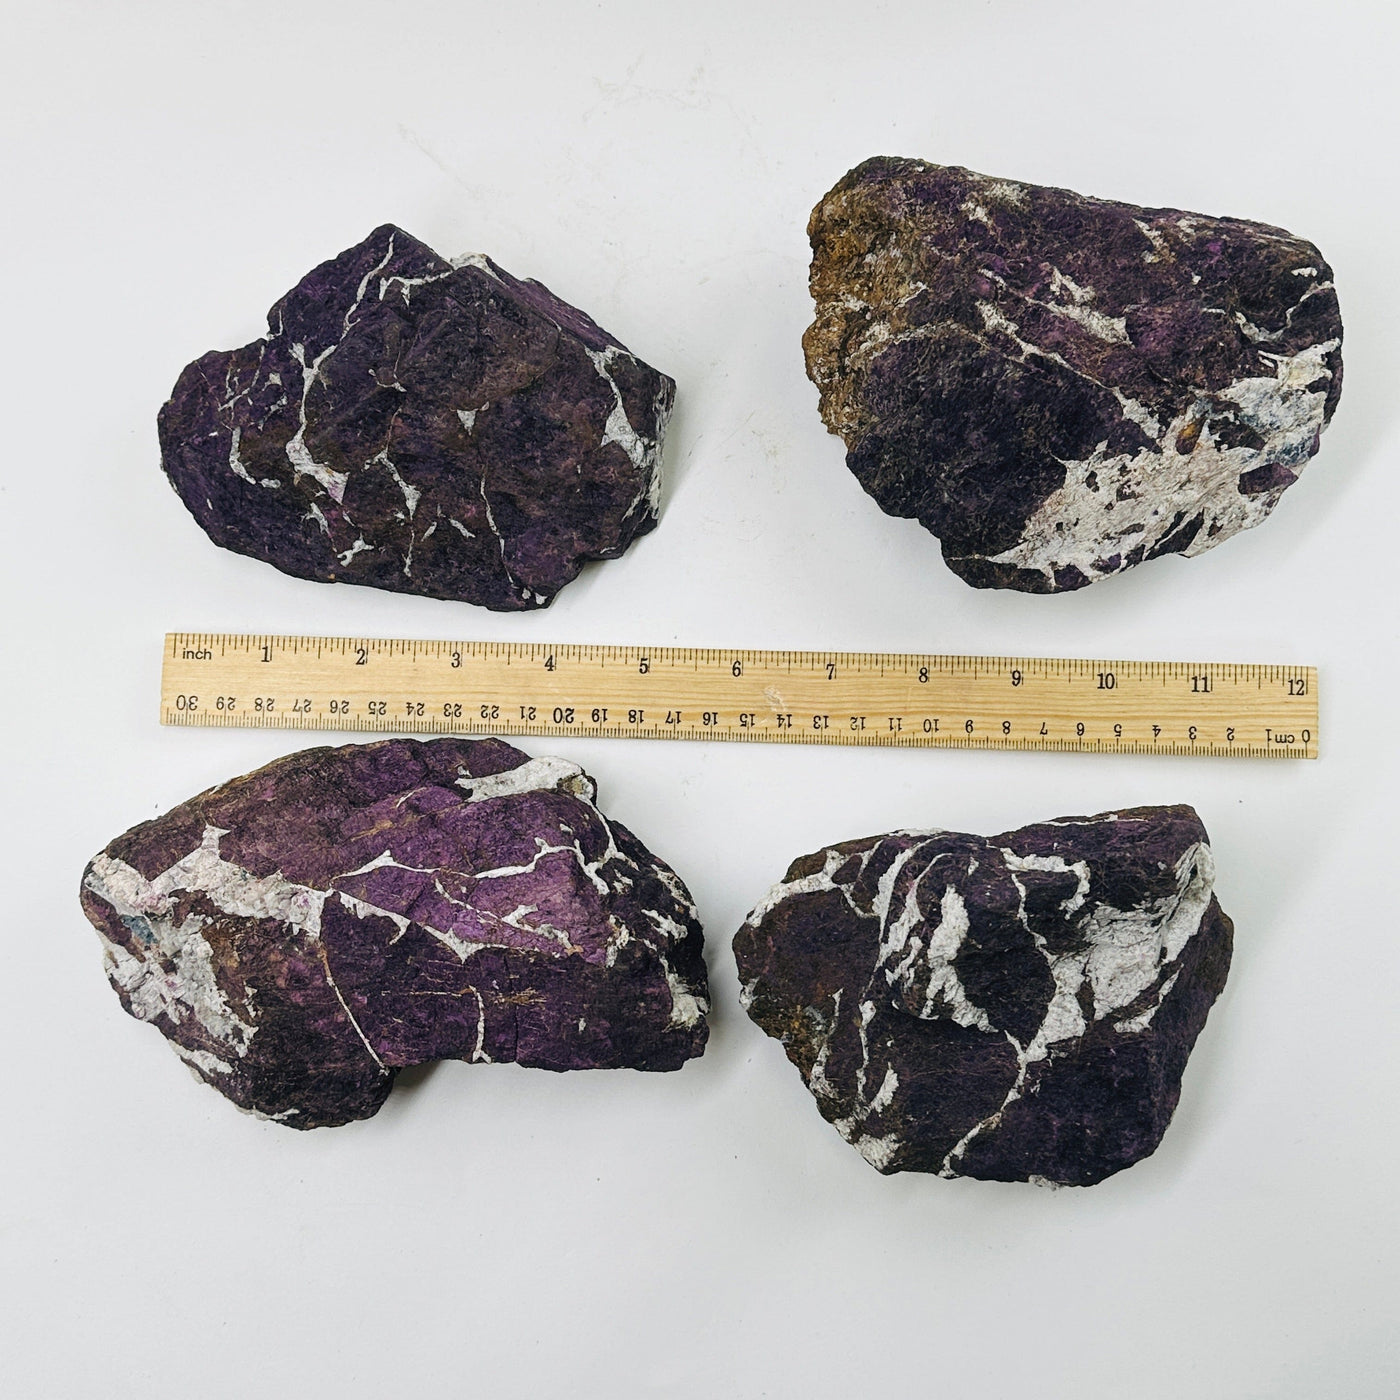 purpurite next to a ruler for size reference